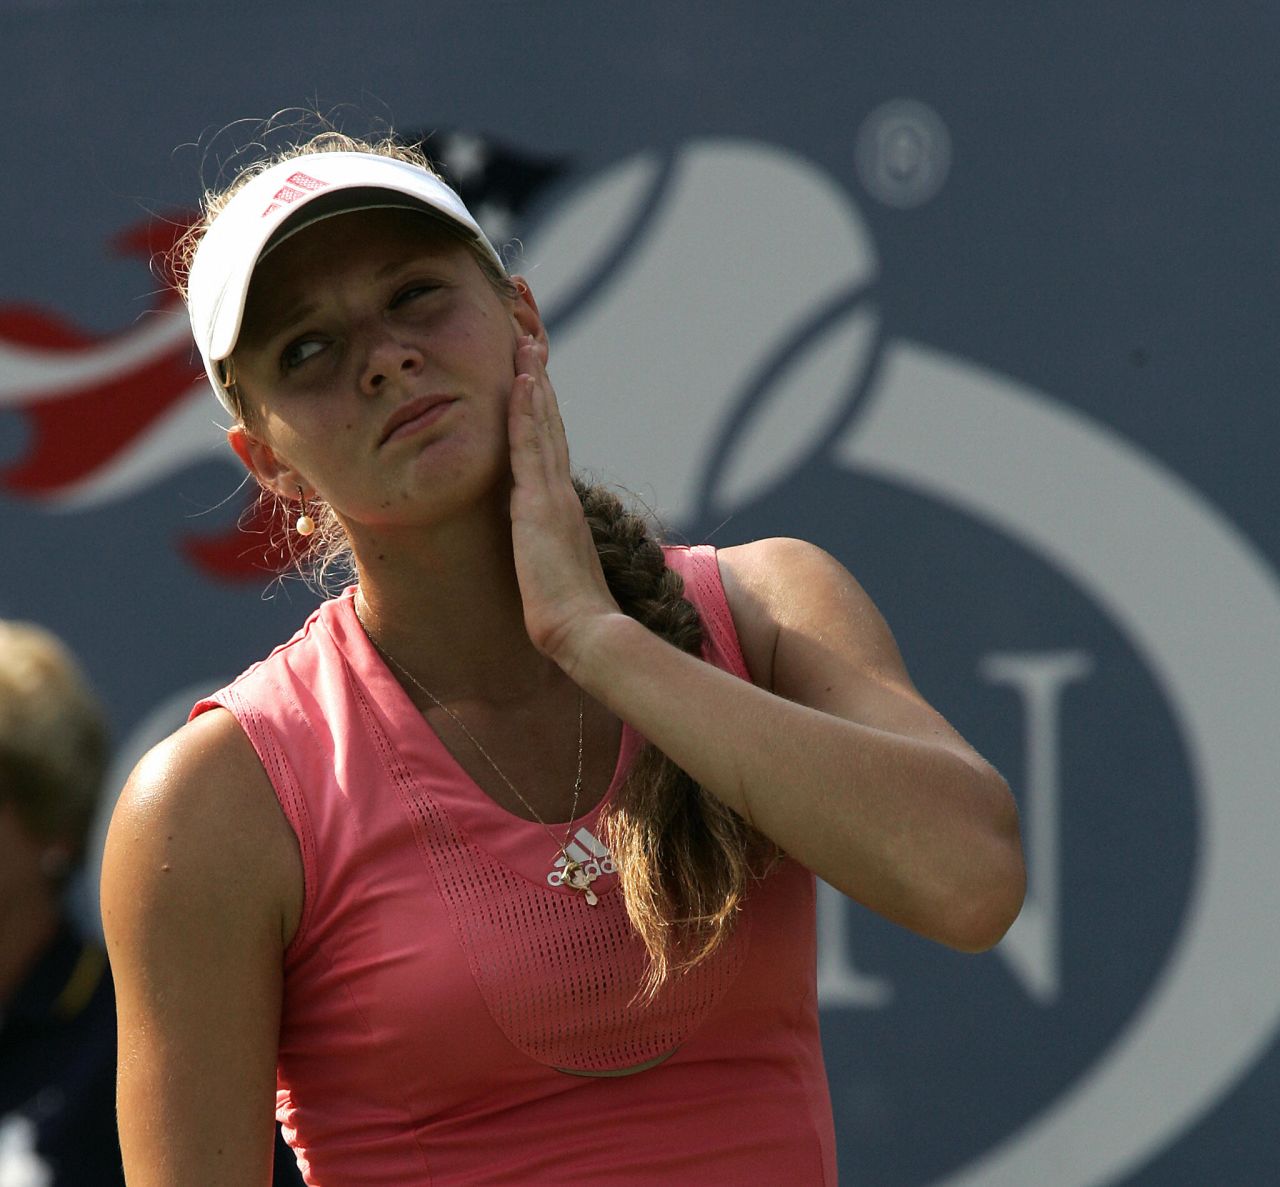 Chakvetadze climbed to a career-high fifth in the world rankings in 2007 after reaching the U.S. Open semifinals, where she lost to compatriot Svetlana Kuznetsova.